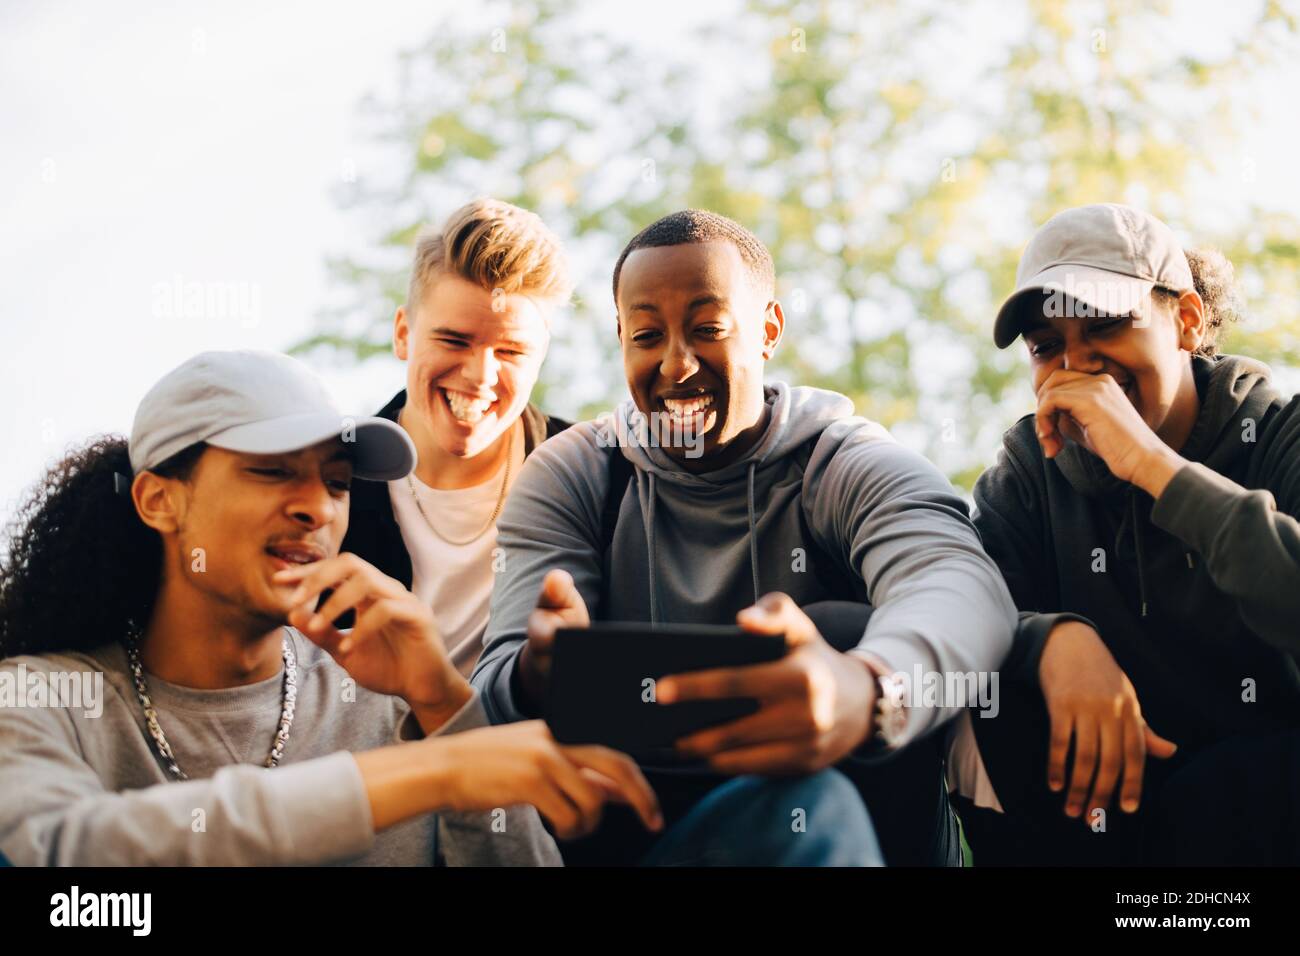 Smiling friends looking at mobile phone in skateboard park Stock Photo